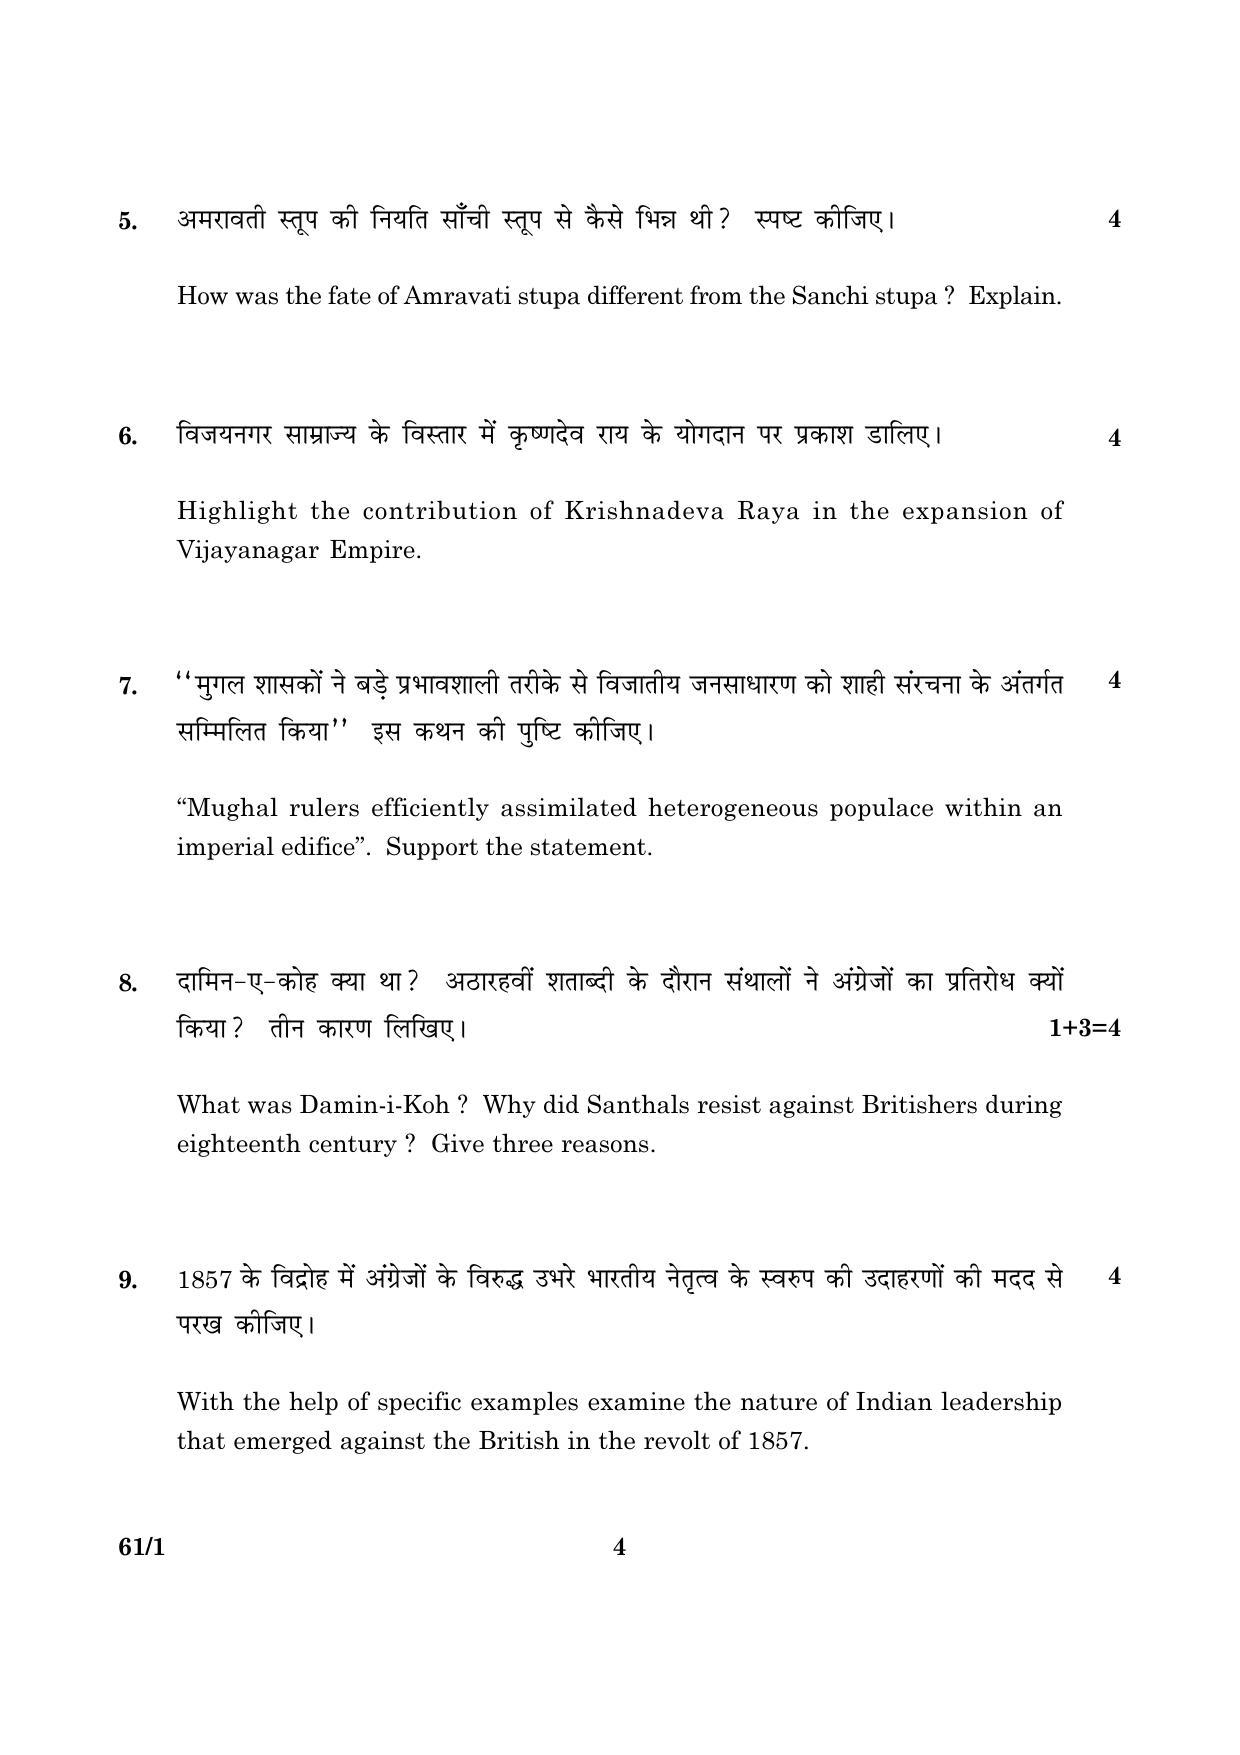 CBSE Class 12 061 Set 1 History 2016 Question Paper - Page 4